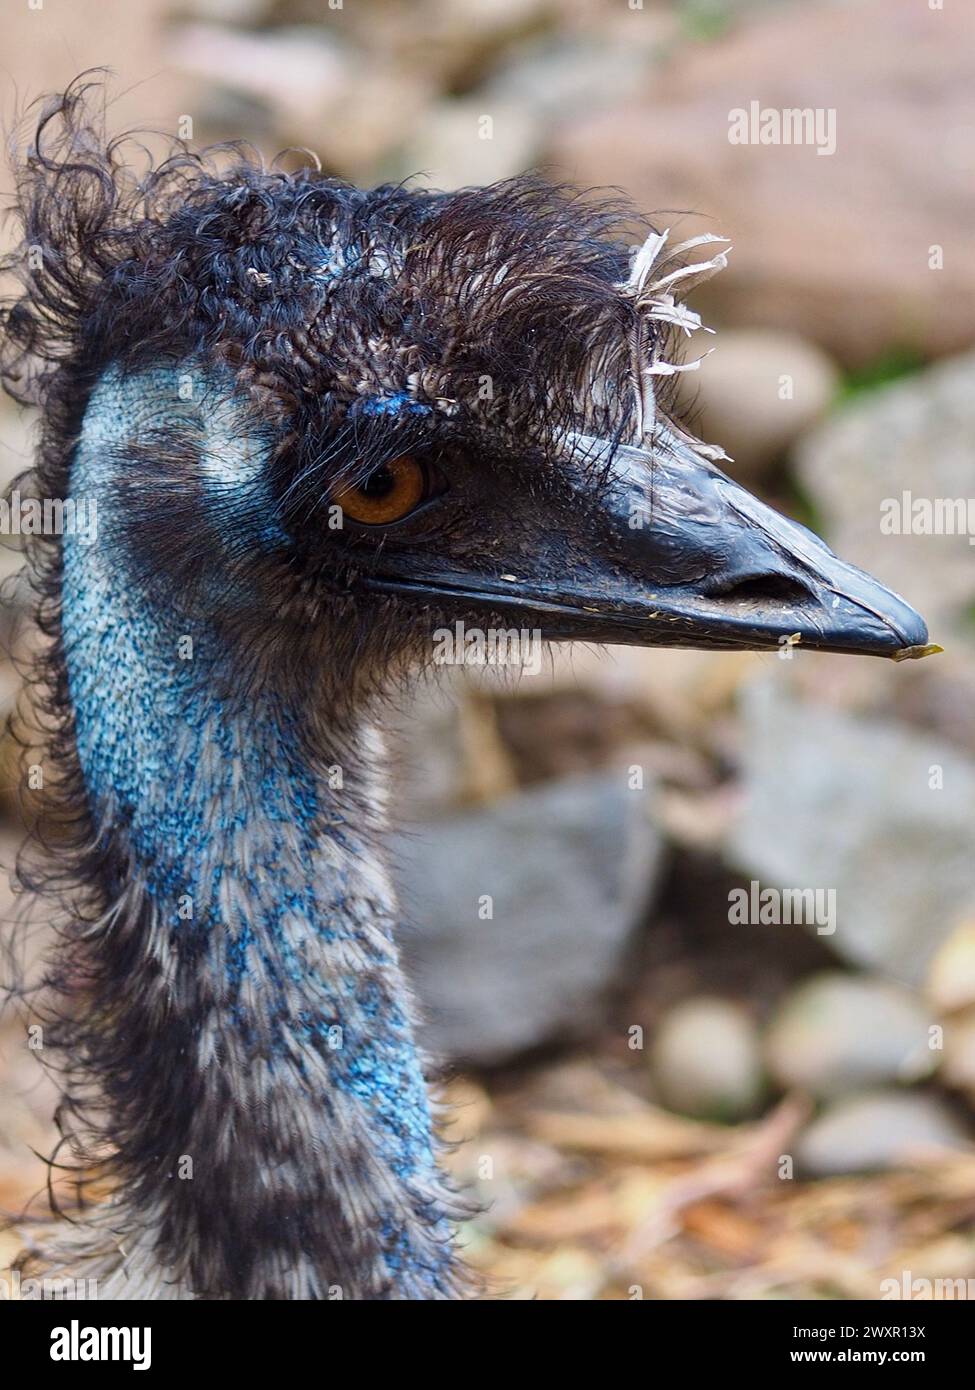 A closeup portrait of a remarkable lovely Emu with bright eyes and distinctive features. Stock Photo